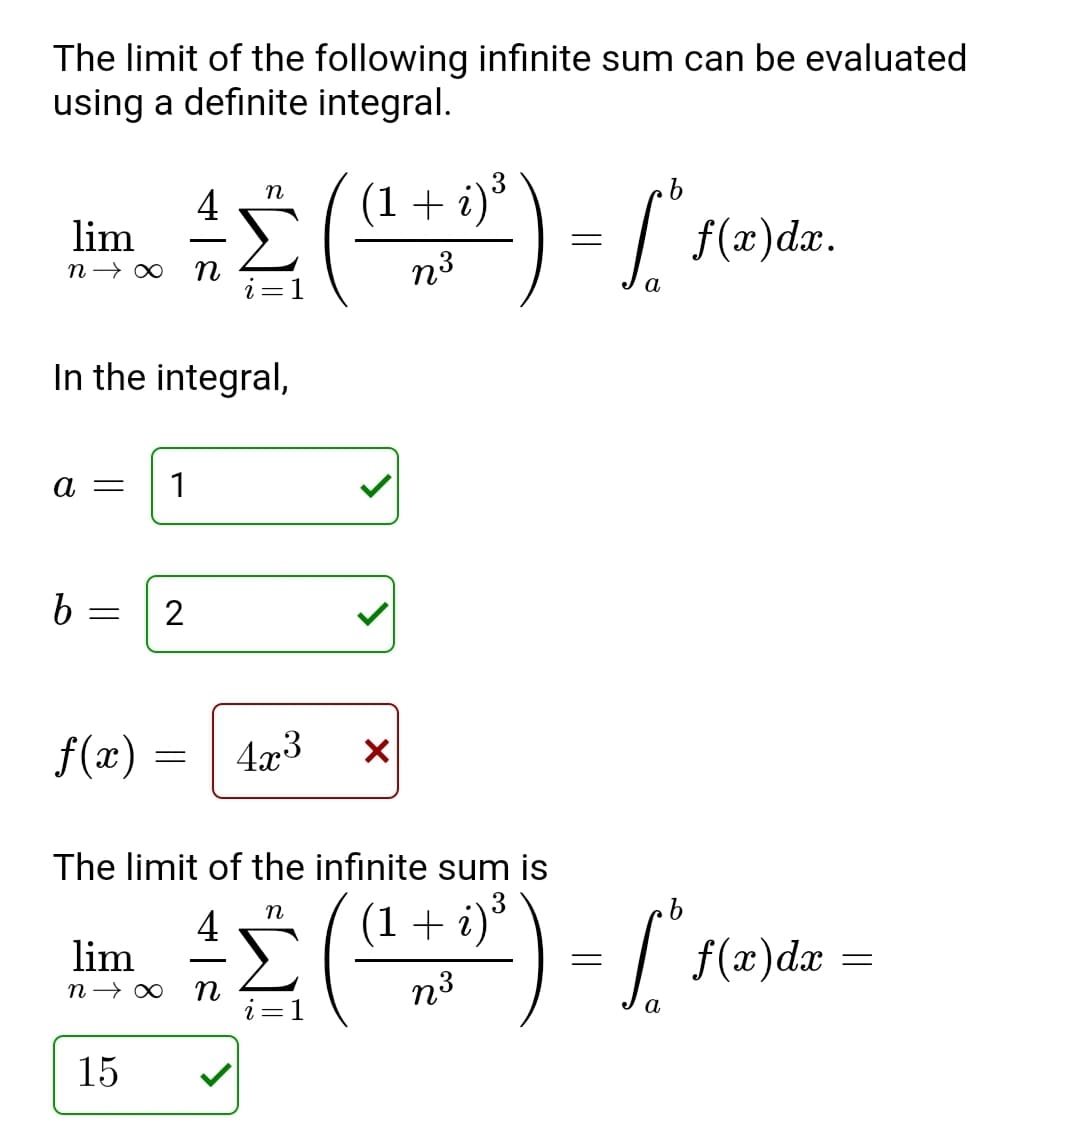 The limit of the following infinite sum can be evaluated
using a definite integral.
4
lim
(1+ i)°
n3
a
In the integral,
a =
1
b
f(x)
4x3
The limit of the infinite sum is
4
lim
(1 + i)³
f(x)dæ =
n
n3
а
15
